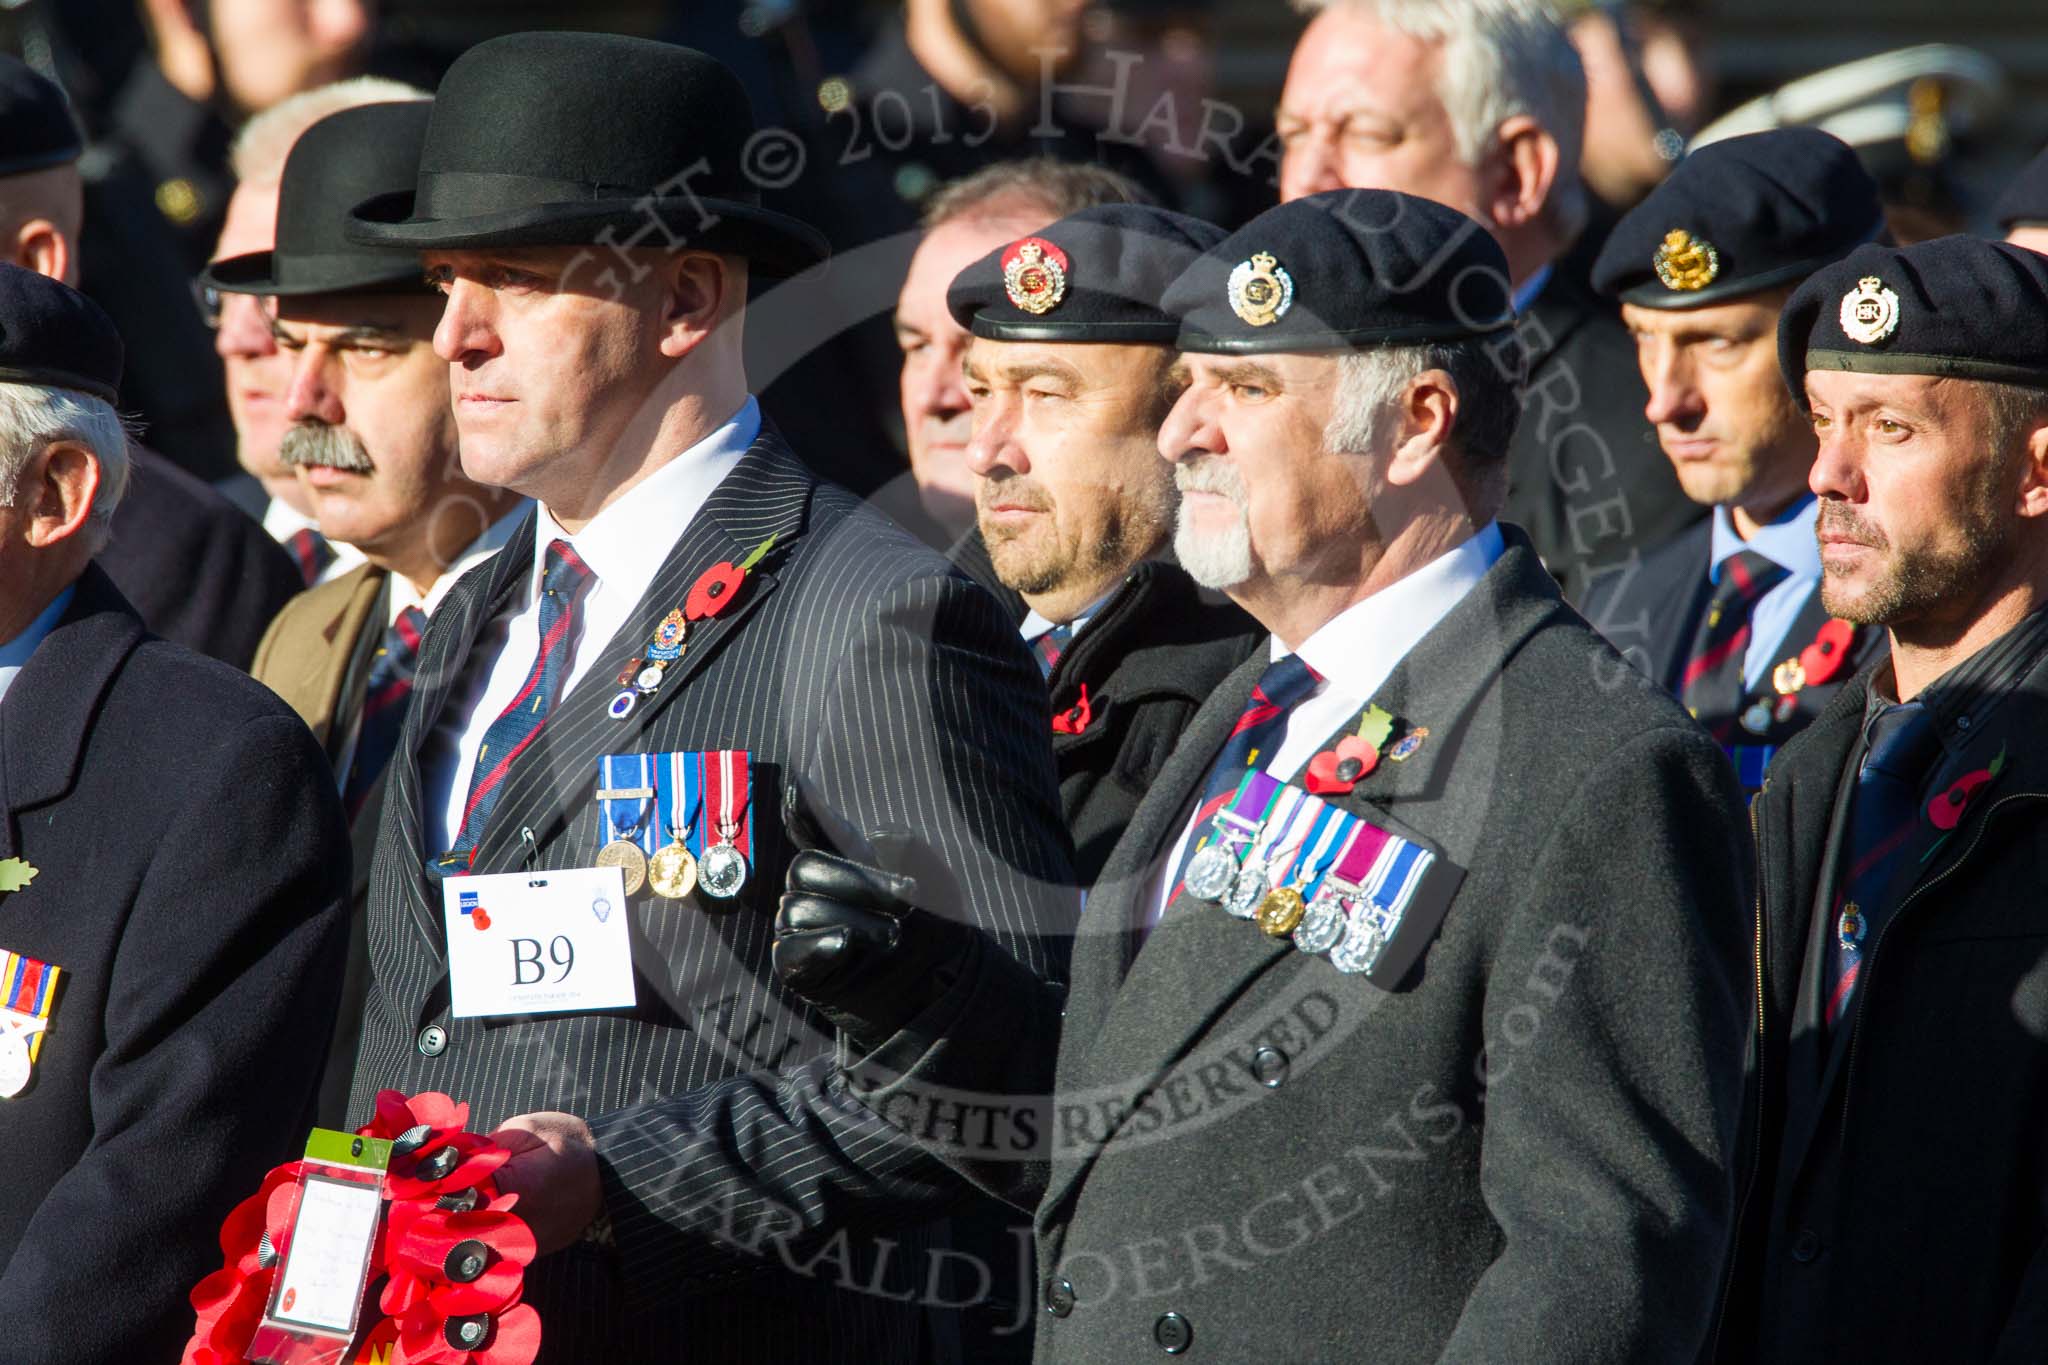 Remembrance Sunday at the Cenotaph in London 2014: Group B9 - Royal Engineers Bomb Disposal Association.
Press stand opposite the Foreign Office building, Whitehall, London SW1,
London,
Greater London,
United Kingdom,
on 09 November 2014 at 12:08, image #1579